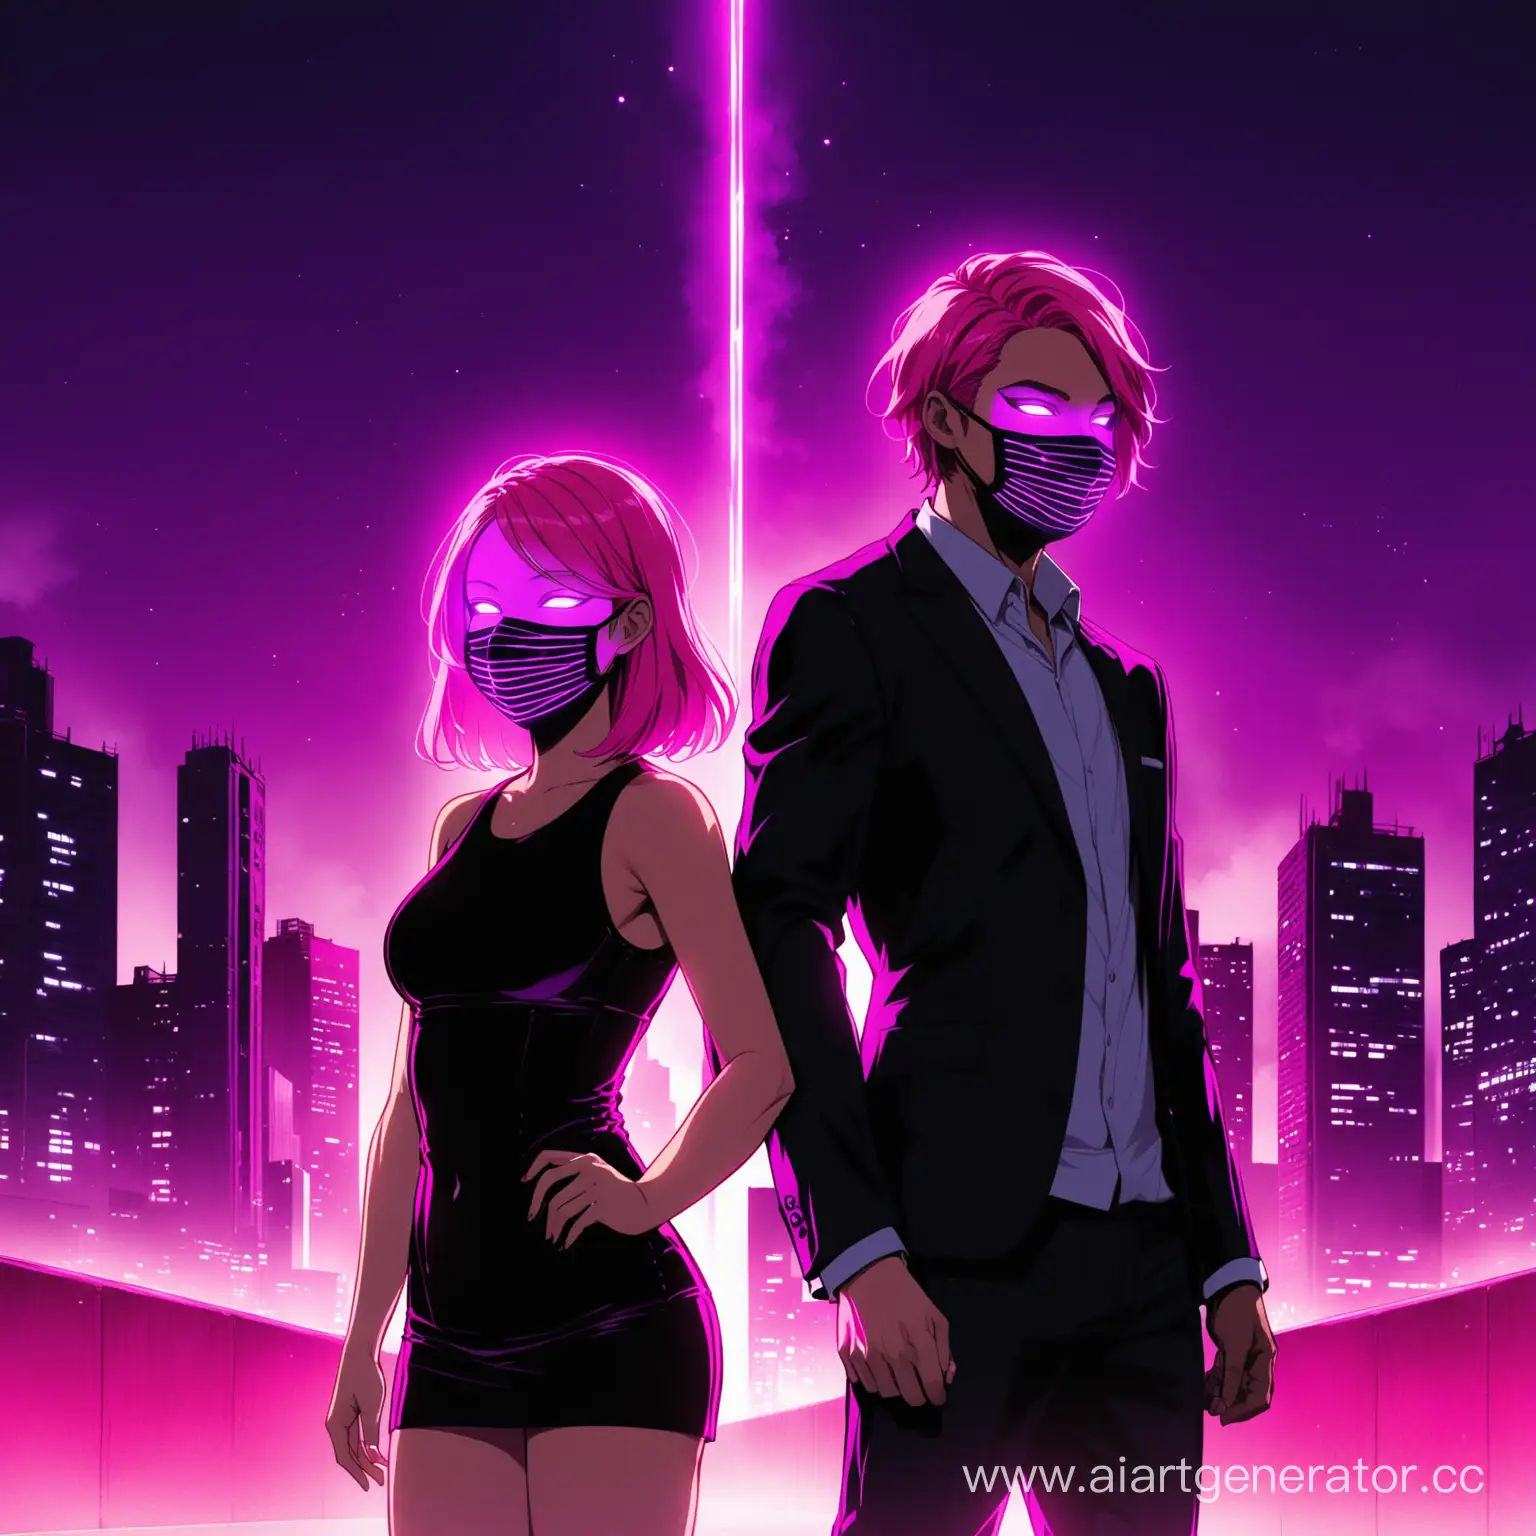 Glowing-PinkHaired-Couple-with-Purple-Face-Masks-in-Urban-Setting